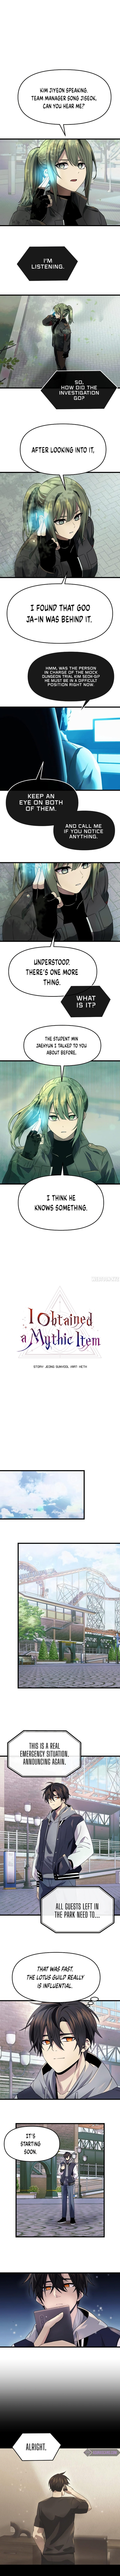 i-obtained-a-mythic-item-chap-41-2